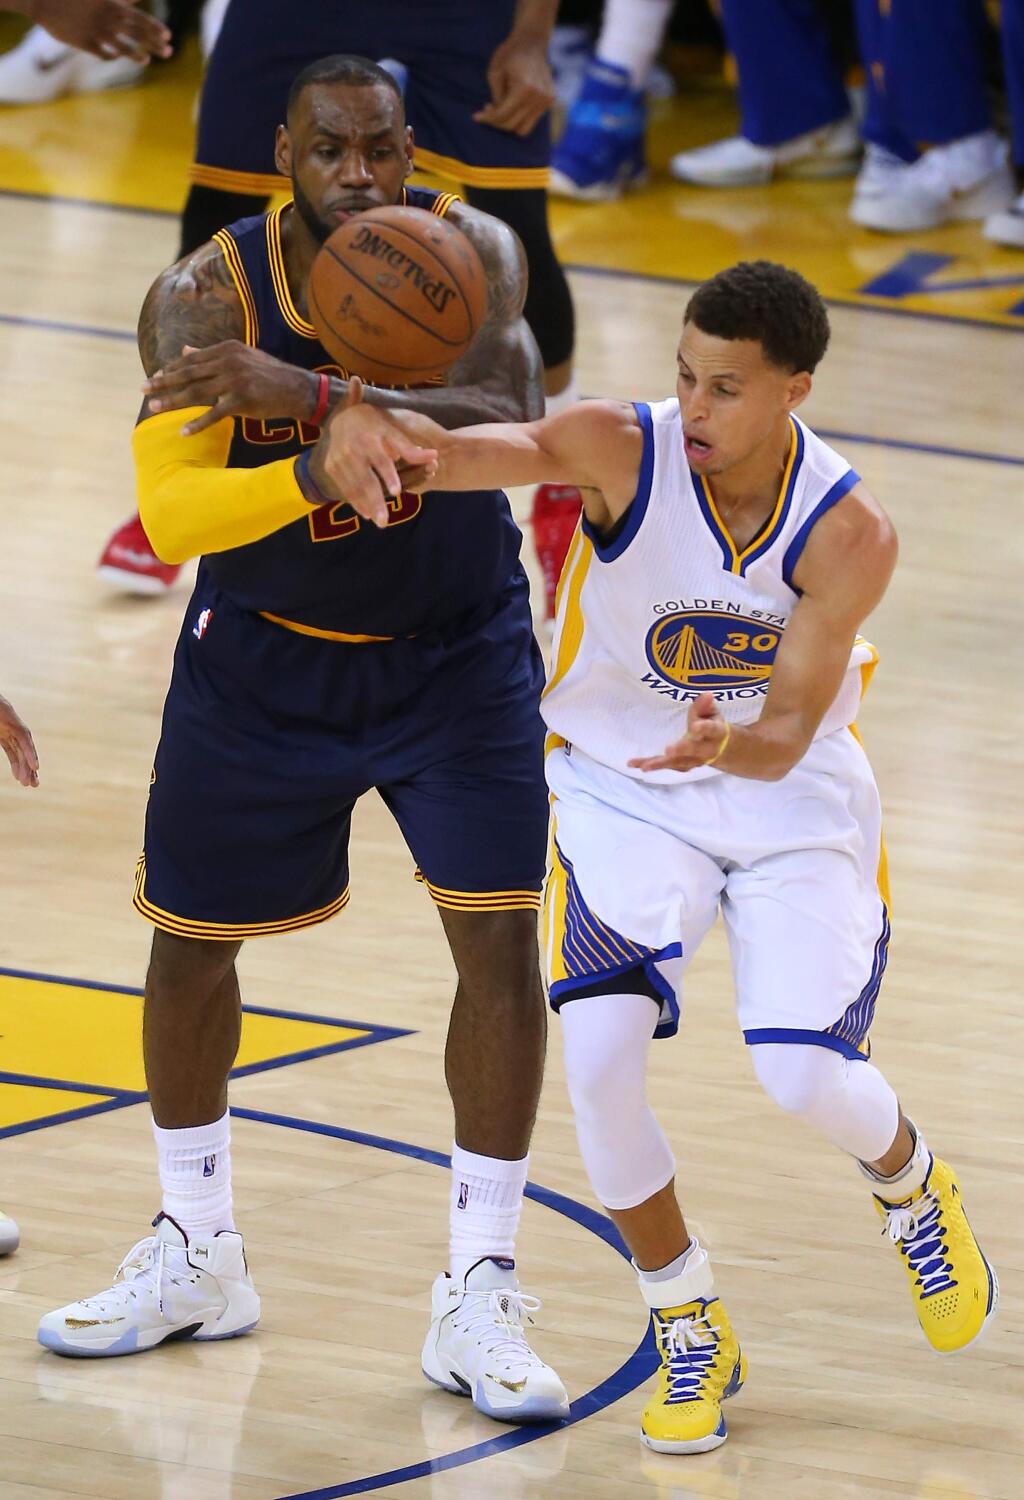 Golden State Warriors guard Stephen Curry steals the ball from Cleveland Cavaliers forward LeBron James late in the fourth quarter during Game 1 of the NBA Finals at Oracle Arena, in Oakland on Thursday, June 4, 2015. The Warriors defeated the Cavaliers 108-100 in overtime.(Christopher Chung/ The Press Democrat)